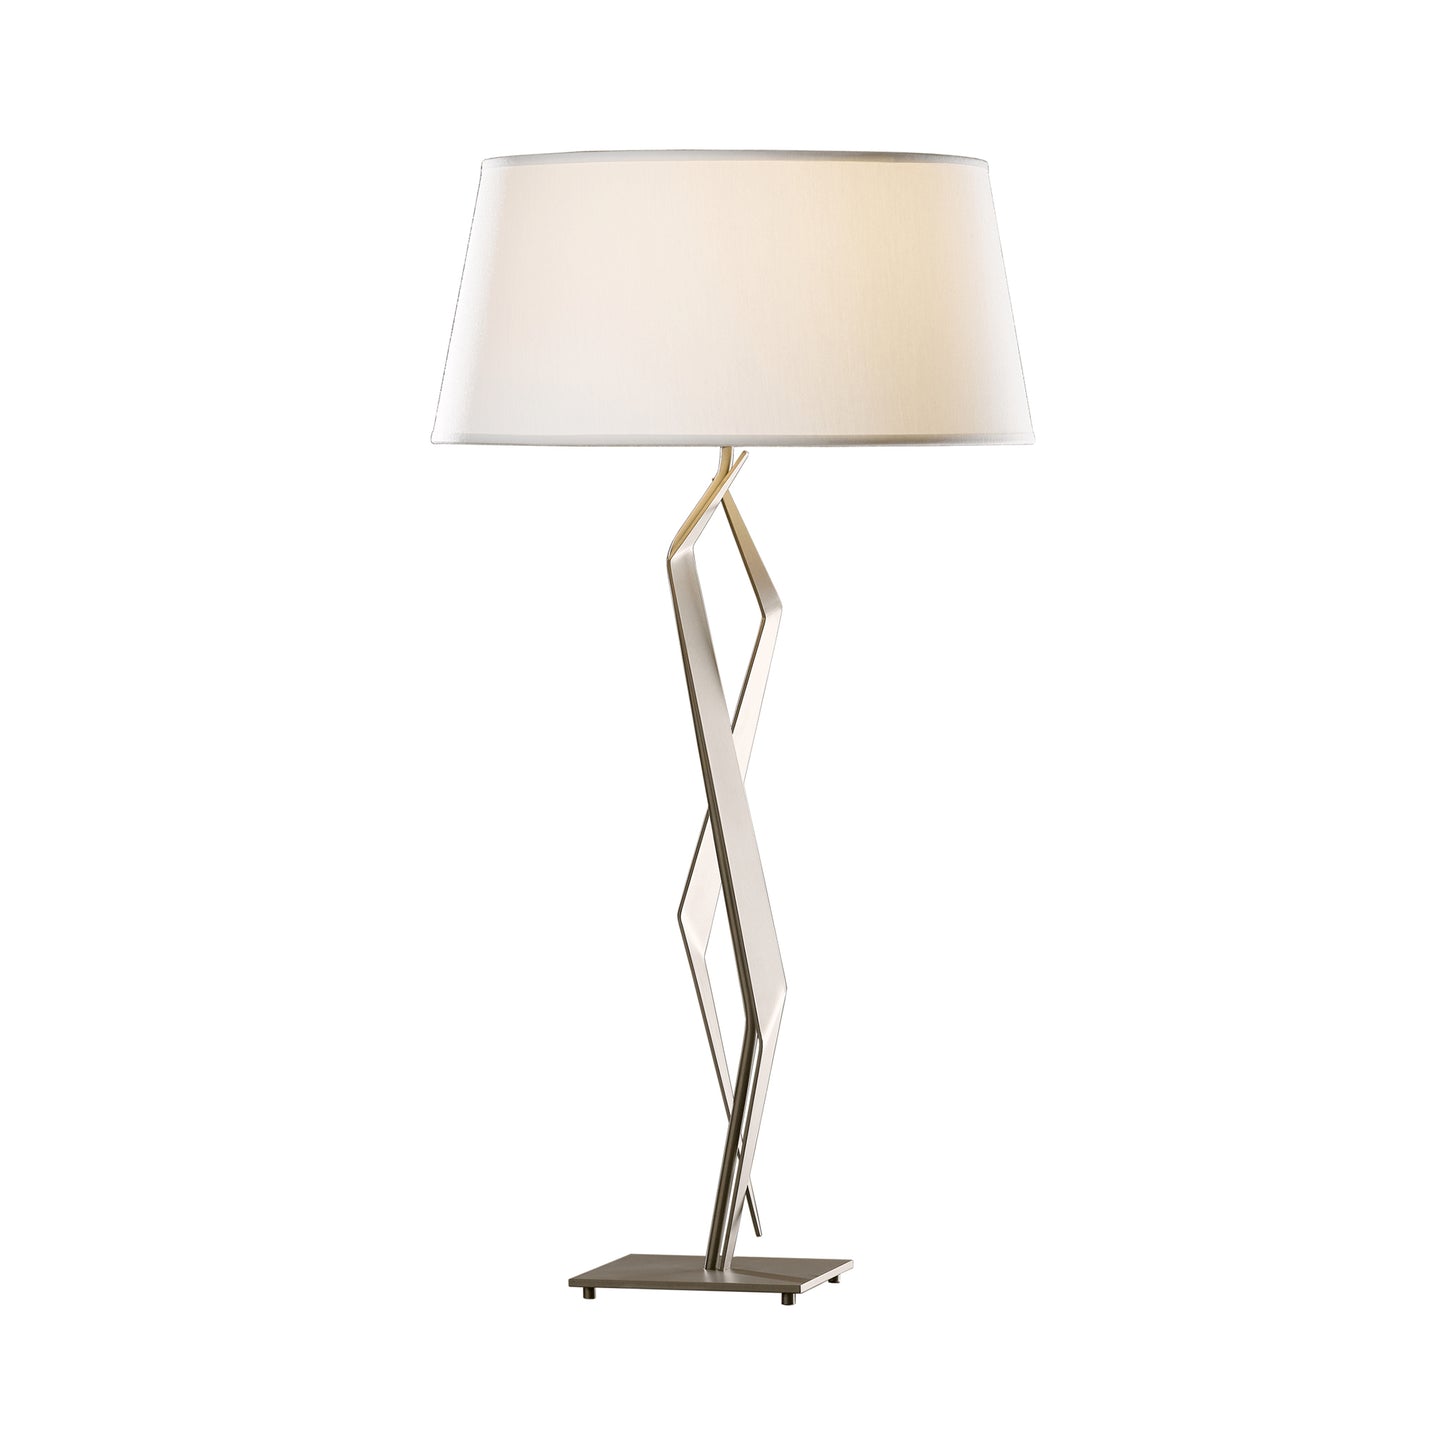 A modern Facet Table Lamp featuring a unique zigzagging metallic base and a large, round, white lampshade, crafted by Hubbardton Forge, standing against a plain white background.